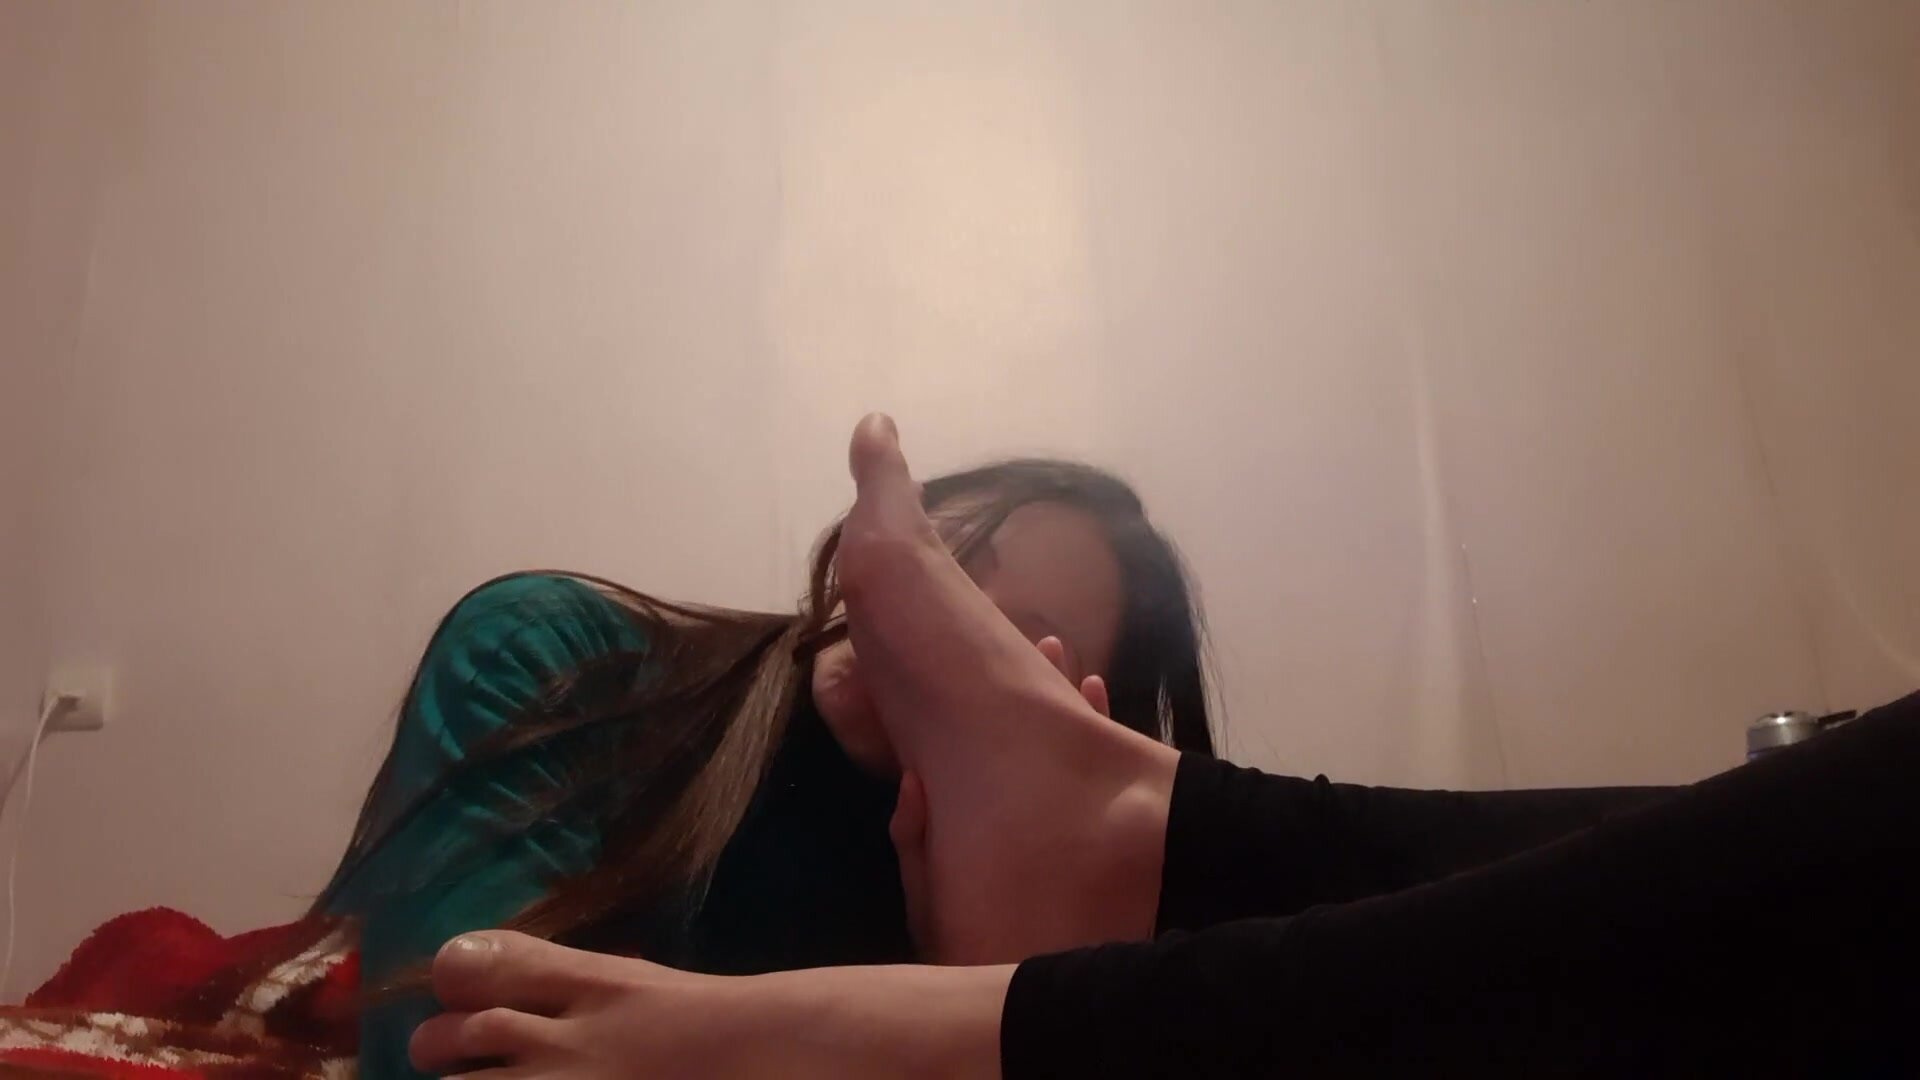 Lesbian_Illusion - For Fans Of Foot Fetish And Hookah